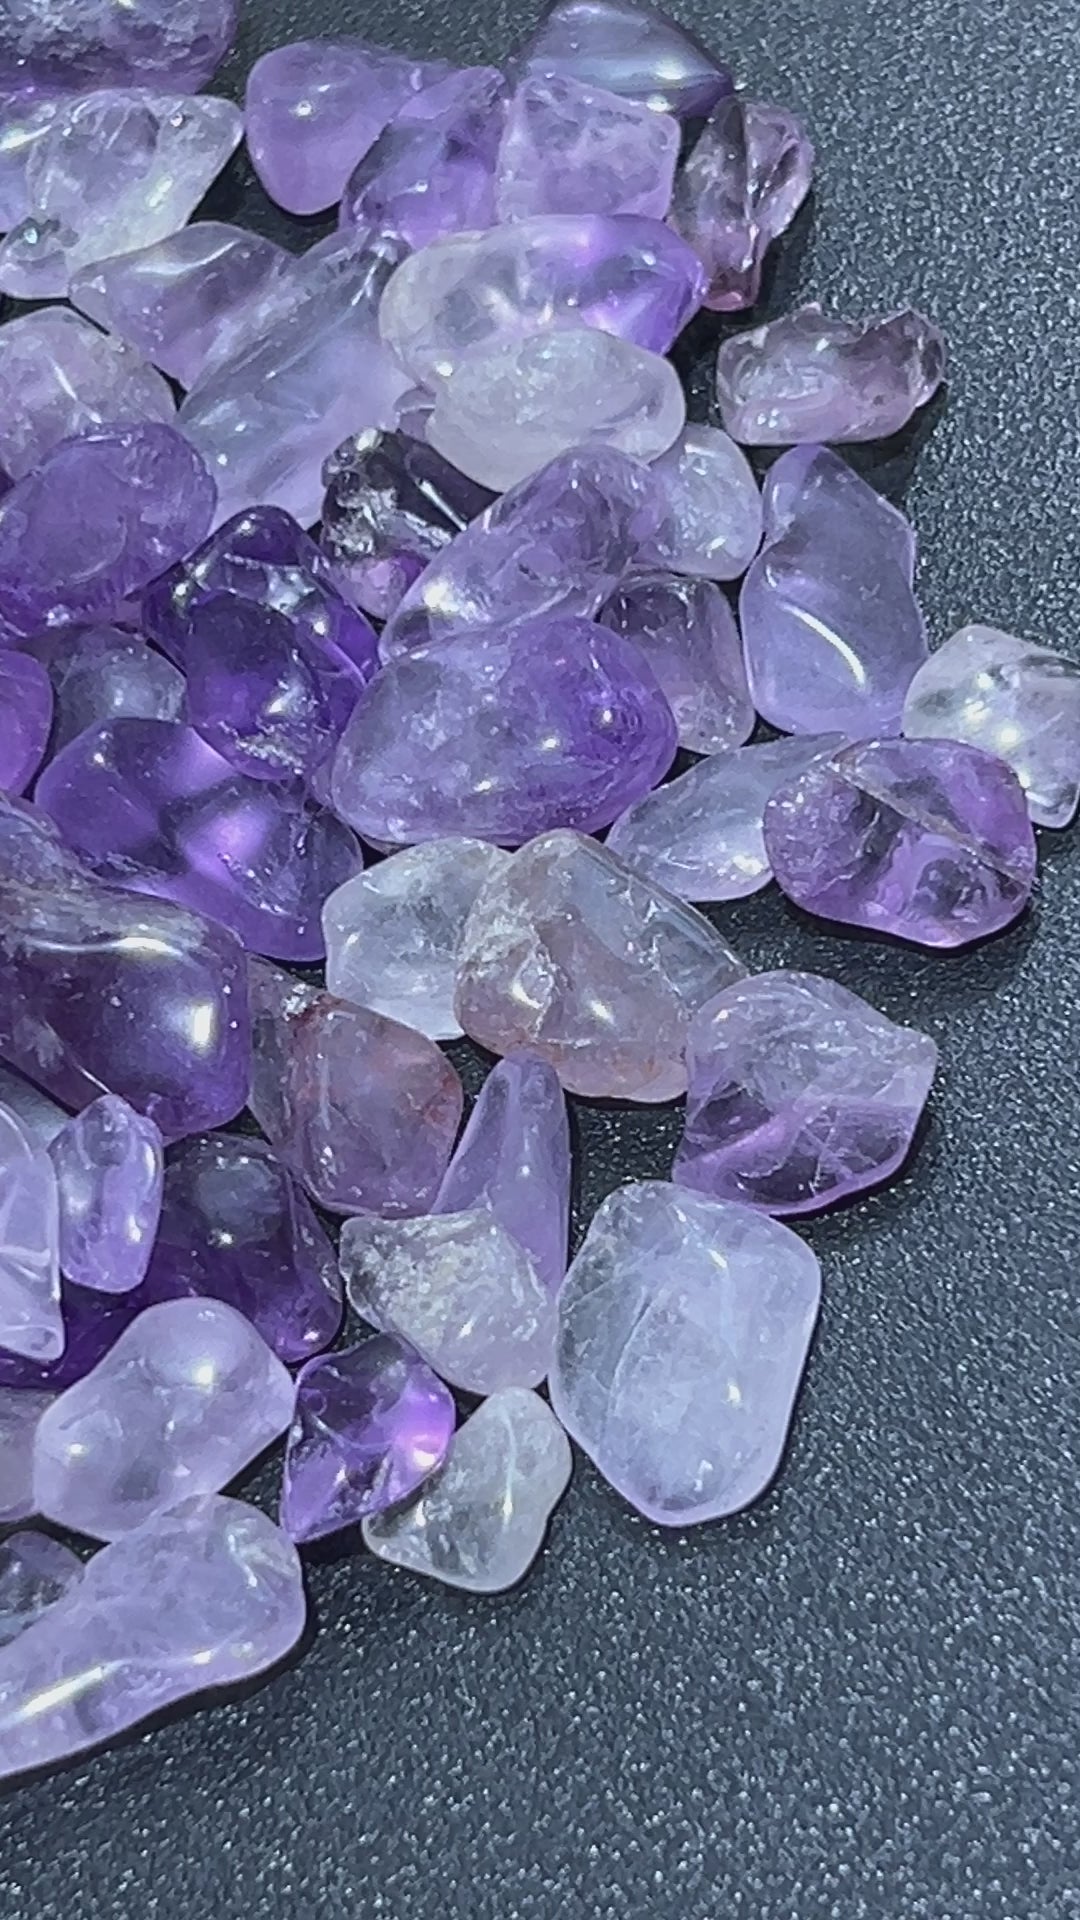 Amethyst Small Tumbled Chips (1 LB) One Pound Bulk Wholesale Lot Tiny Raw Natural Gemstones